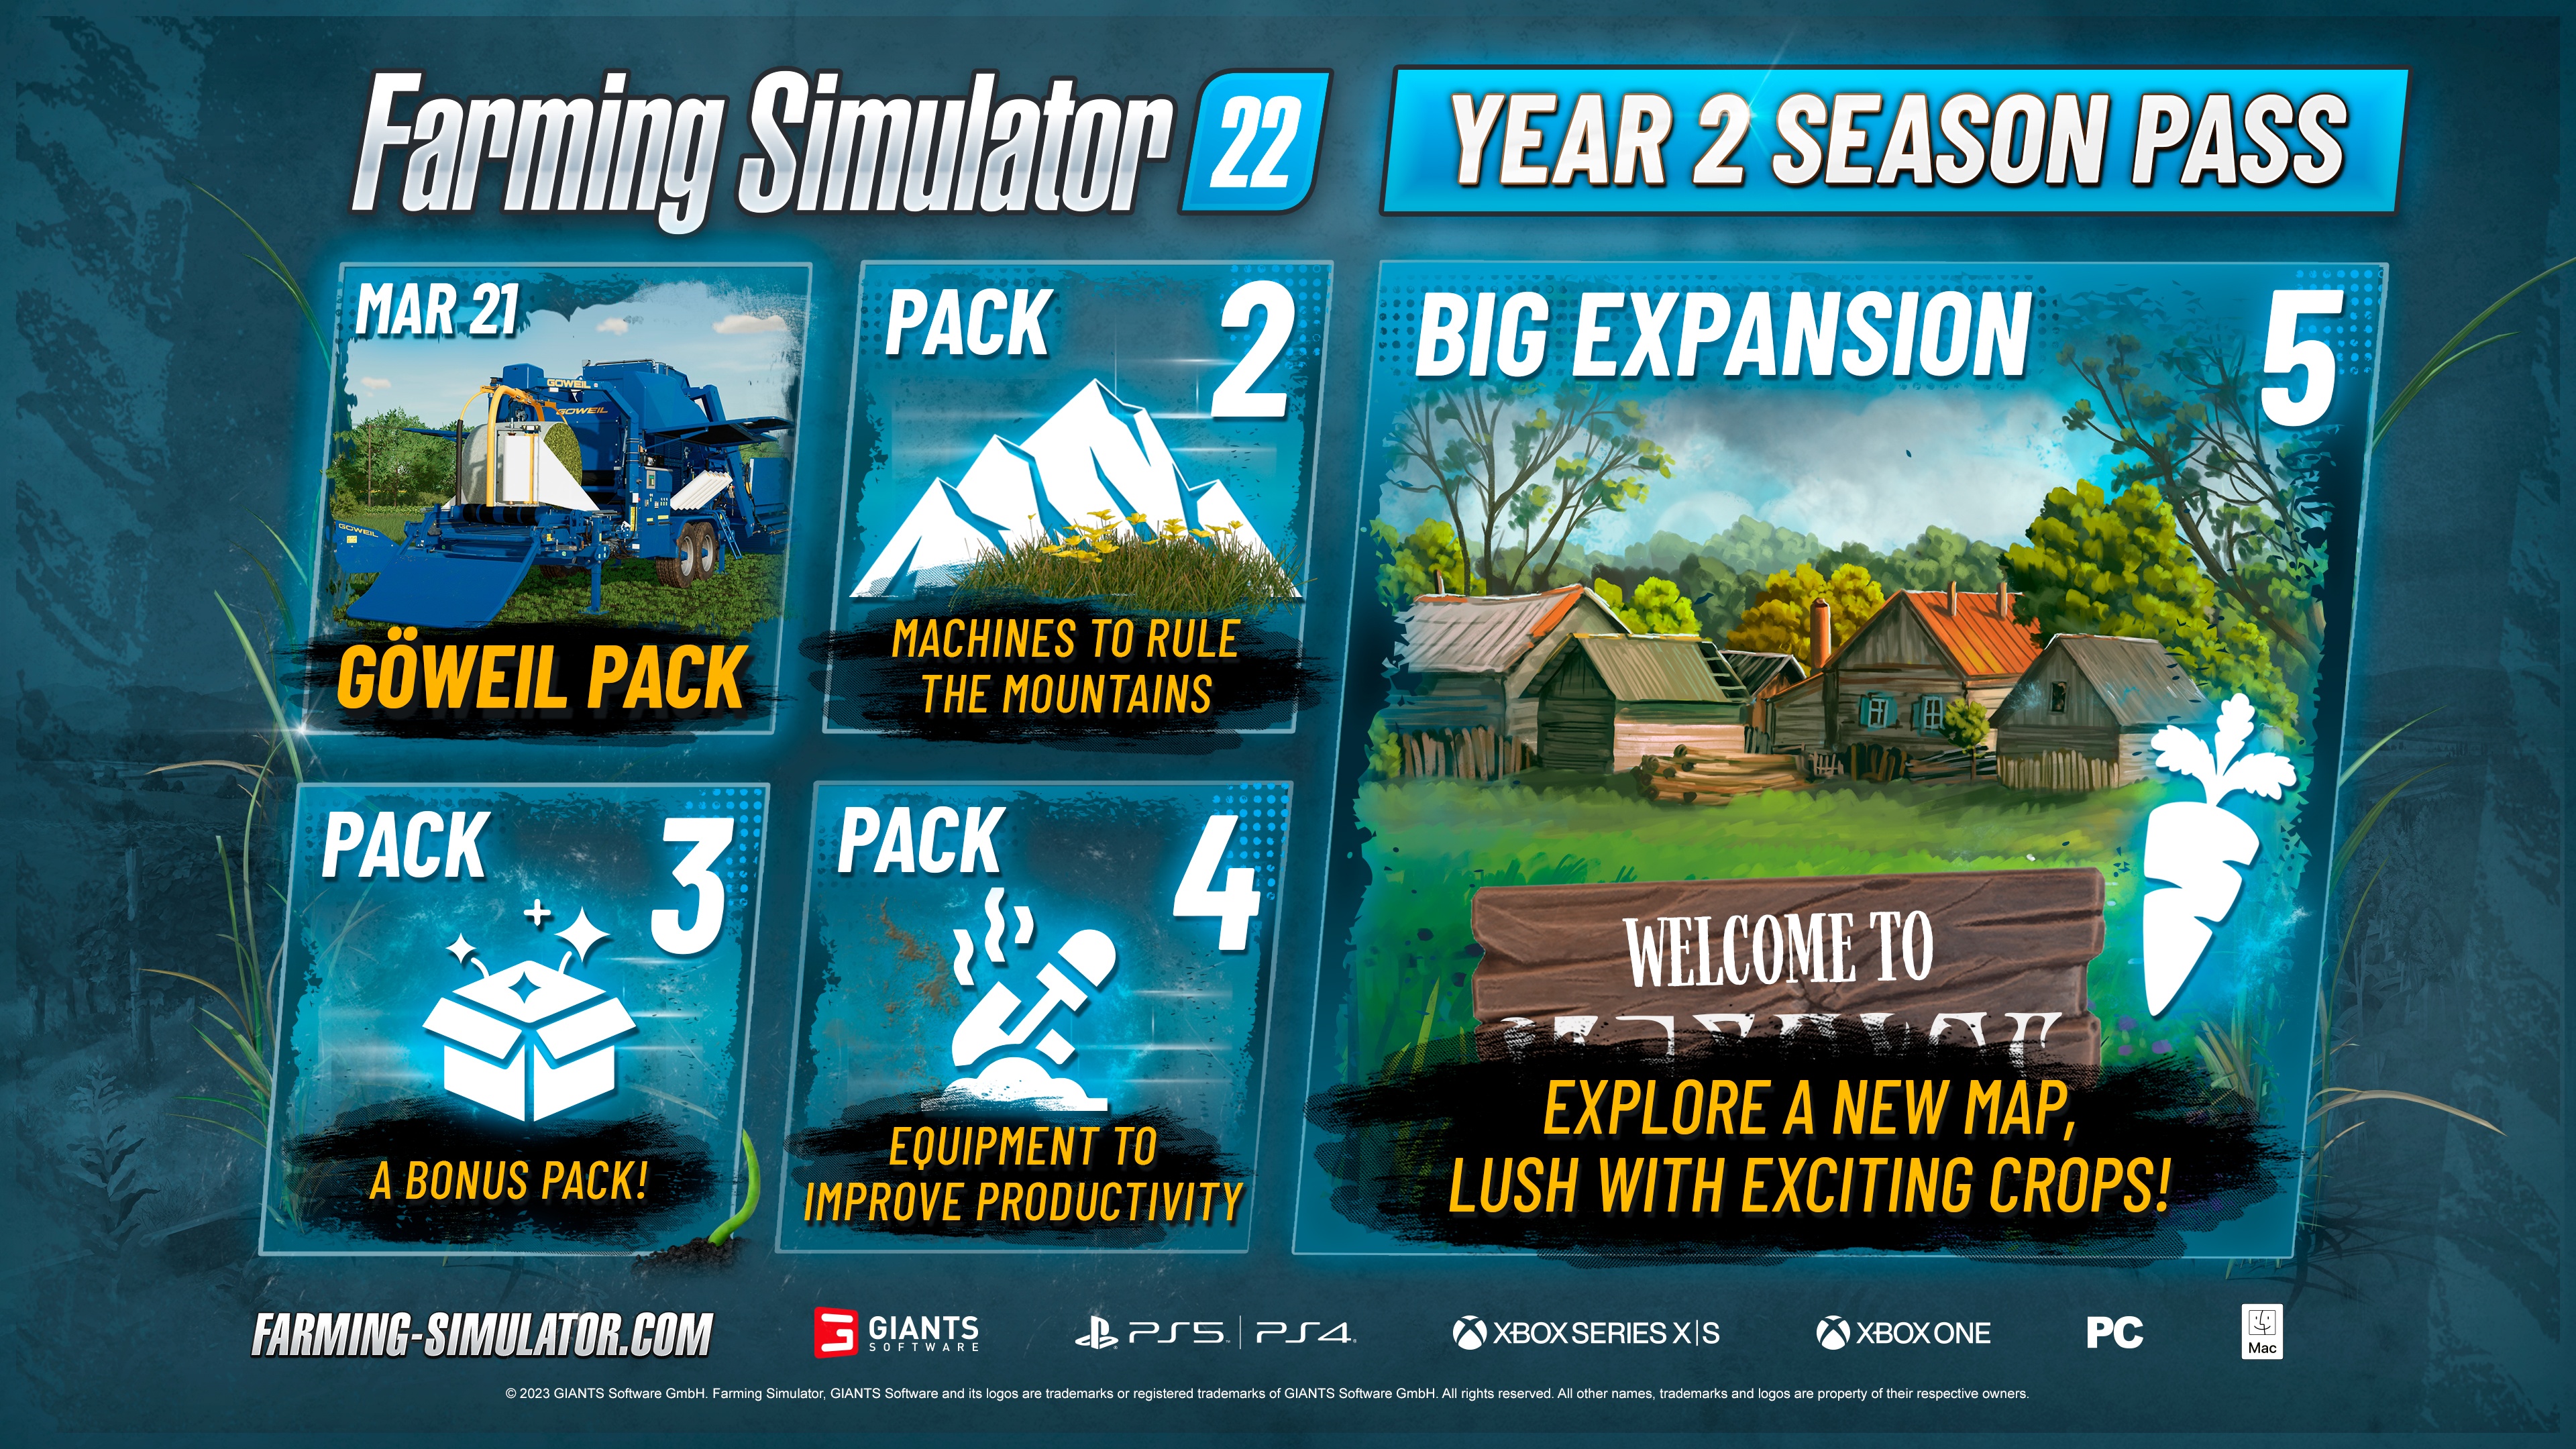 (More small DLCs and a big expansion will be released in 2023.)